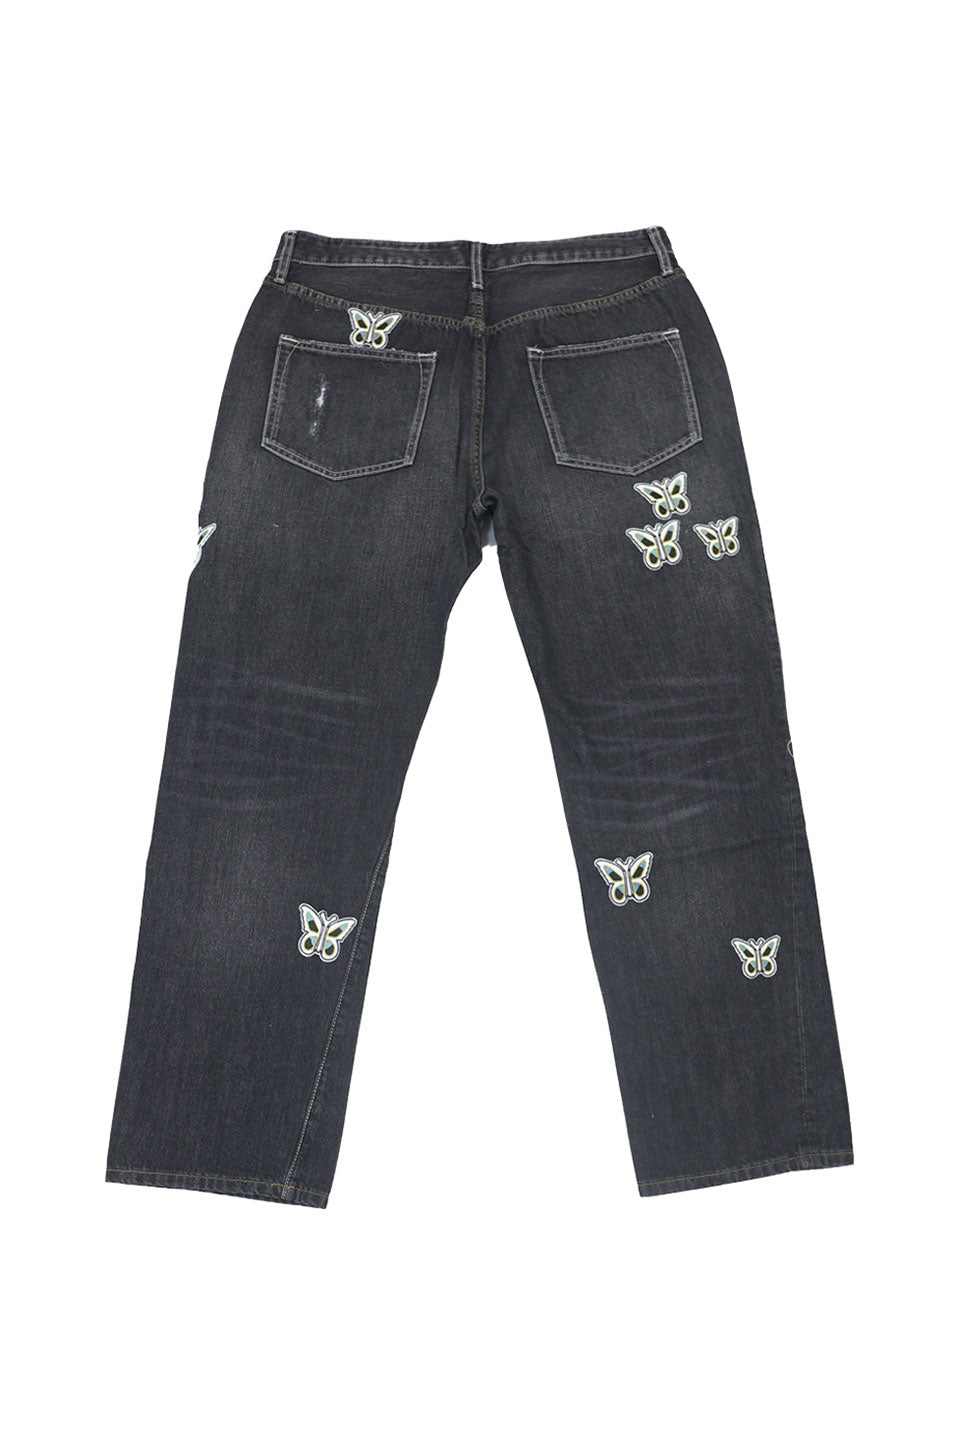 Butterfly Crushed Denim